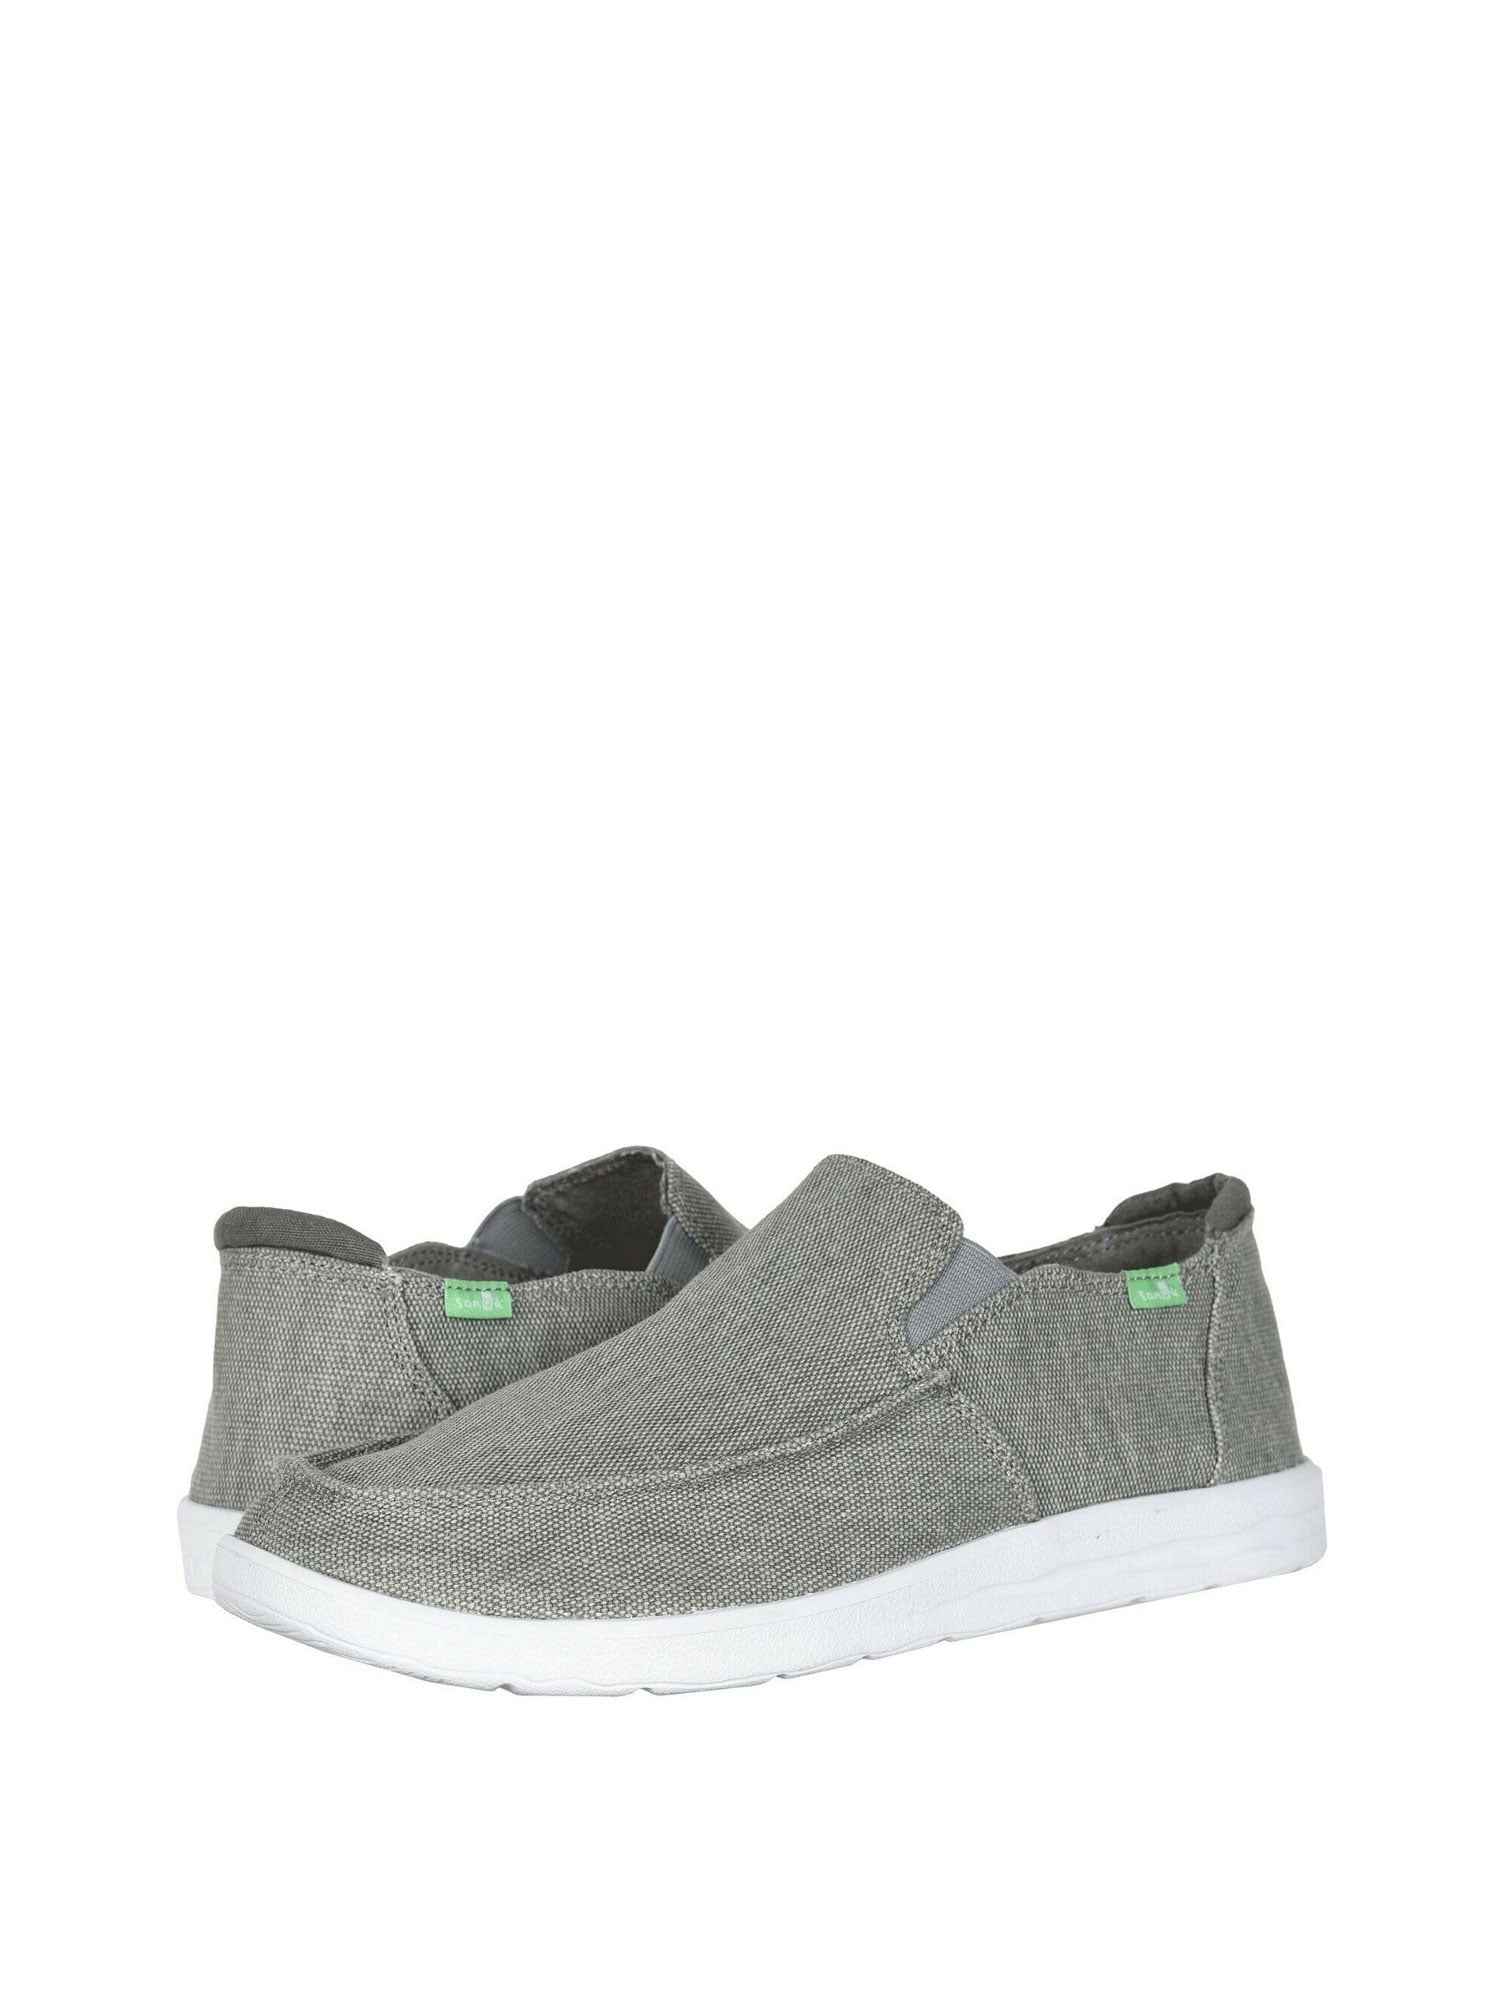 Sanuk Hi Five Grey Lightweight Slip On Breathable Cushioned Low Top ...